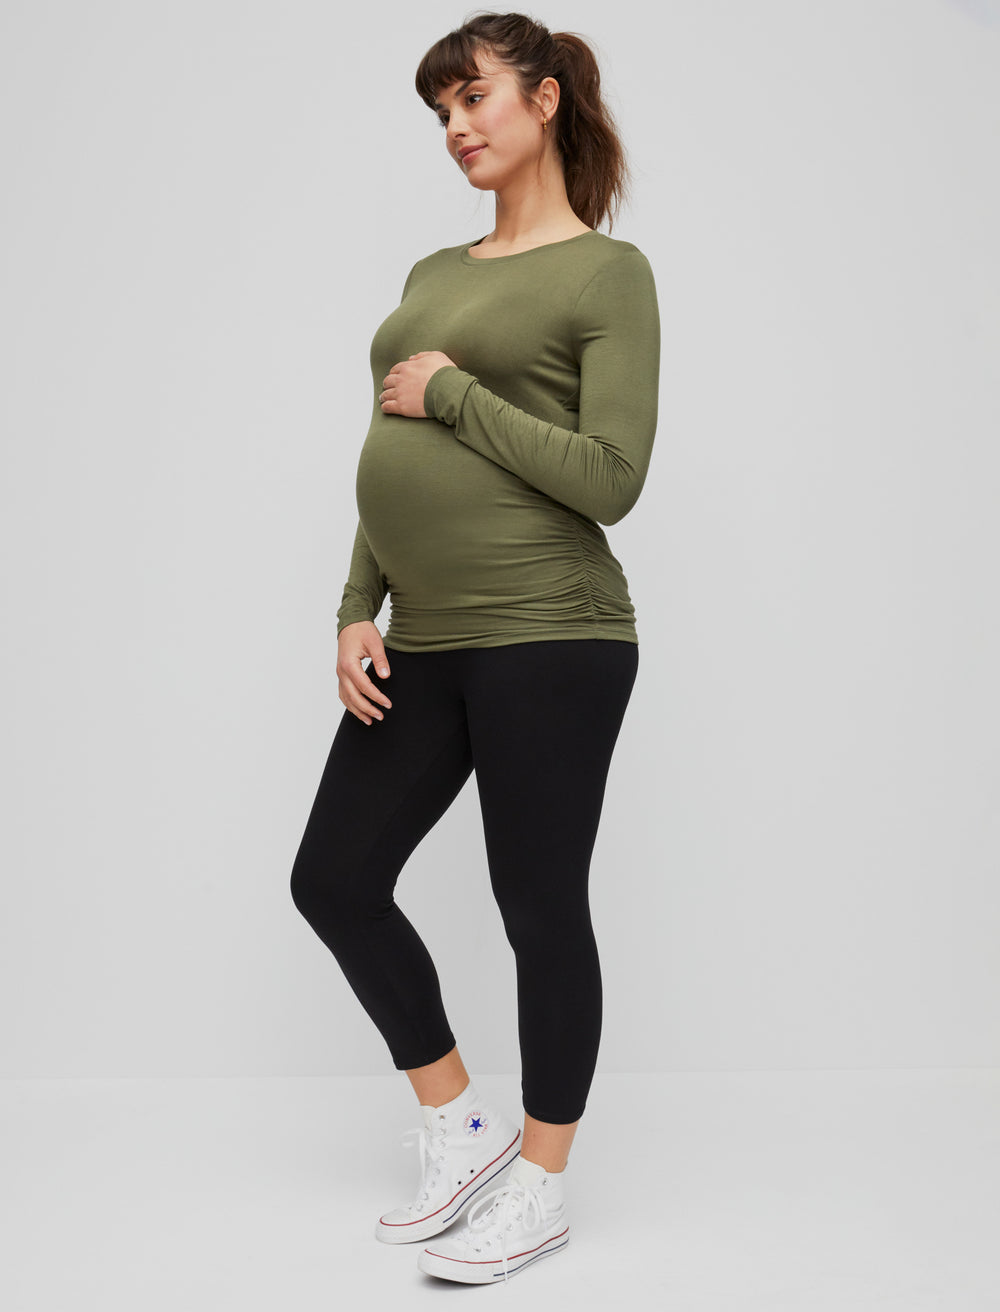 Recycled Ribbed Nadia Cropped Leggings in olive green - ActandBe